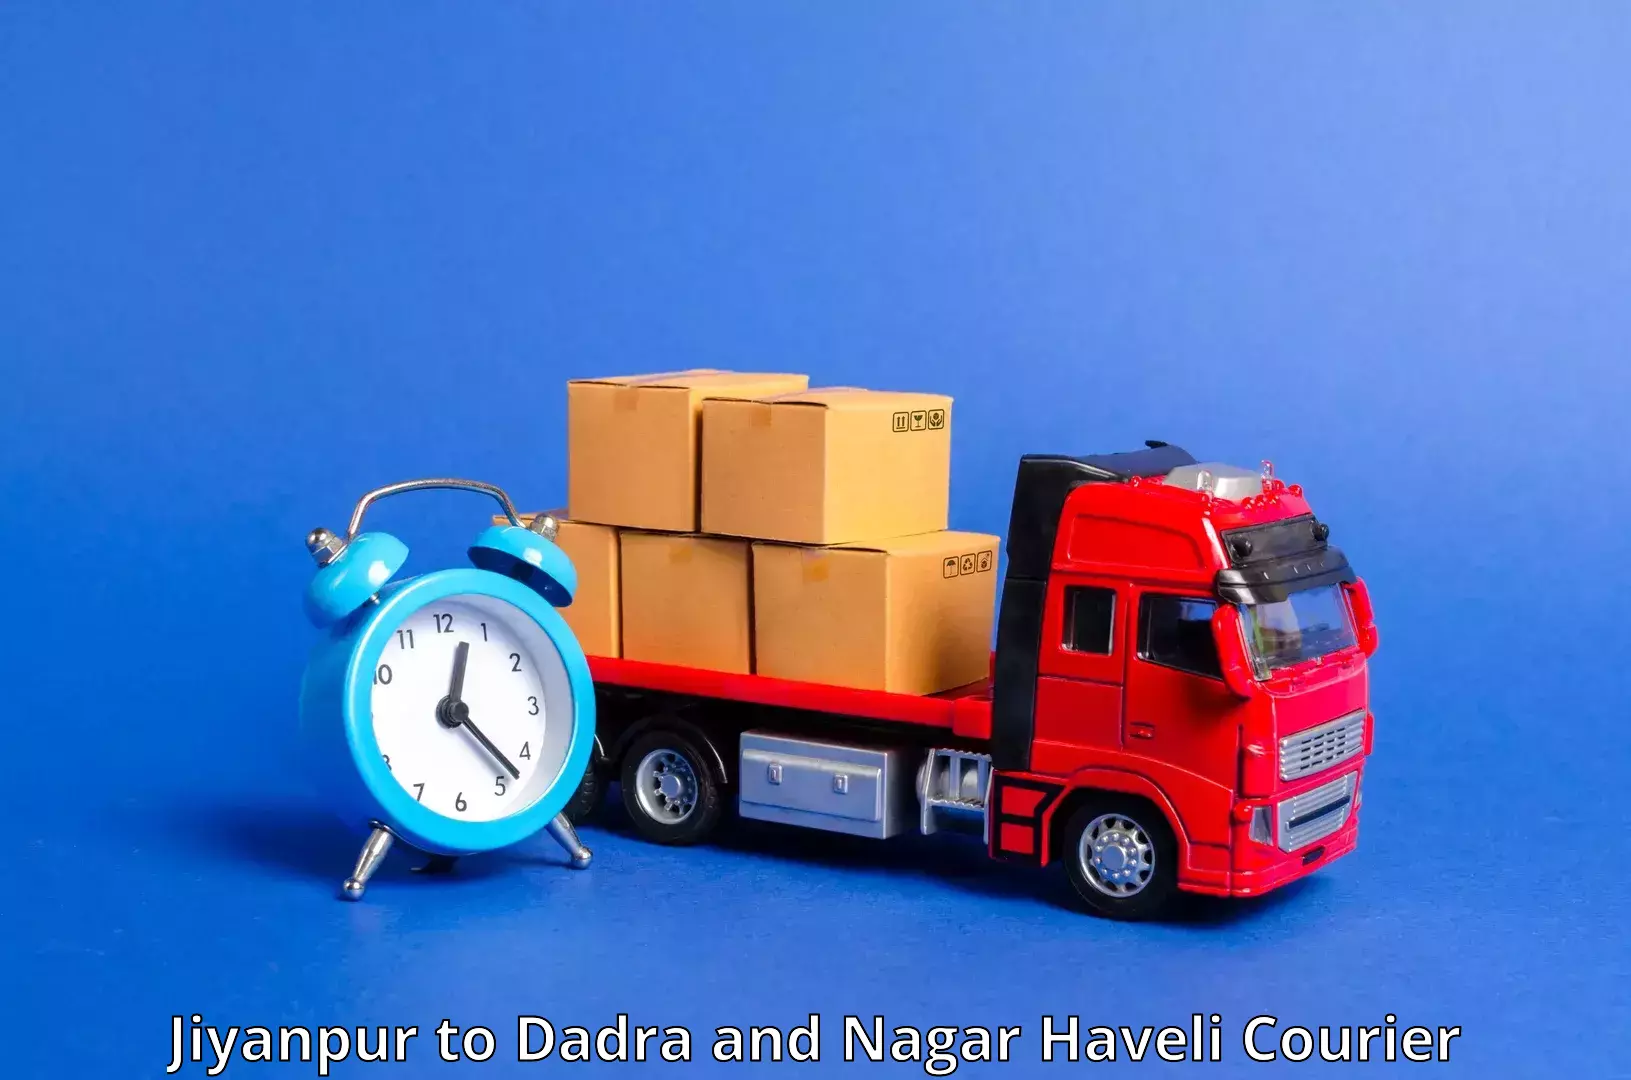 High-speed delivery Jiyanpur to Dadra and Nagar Haveli